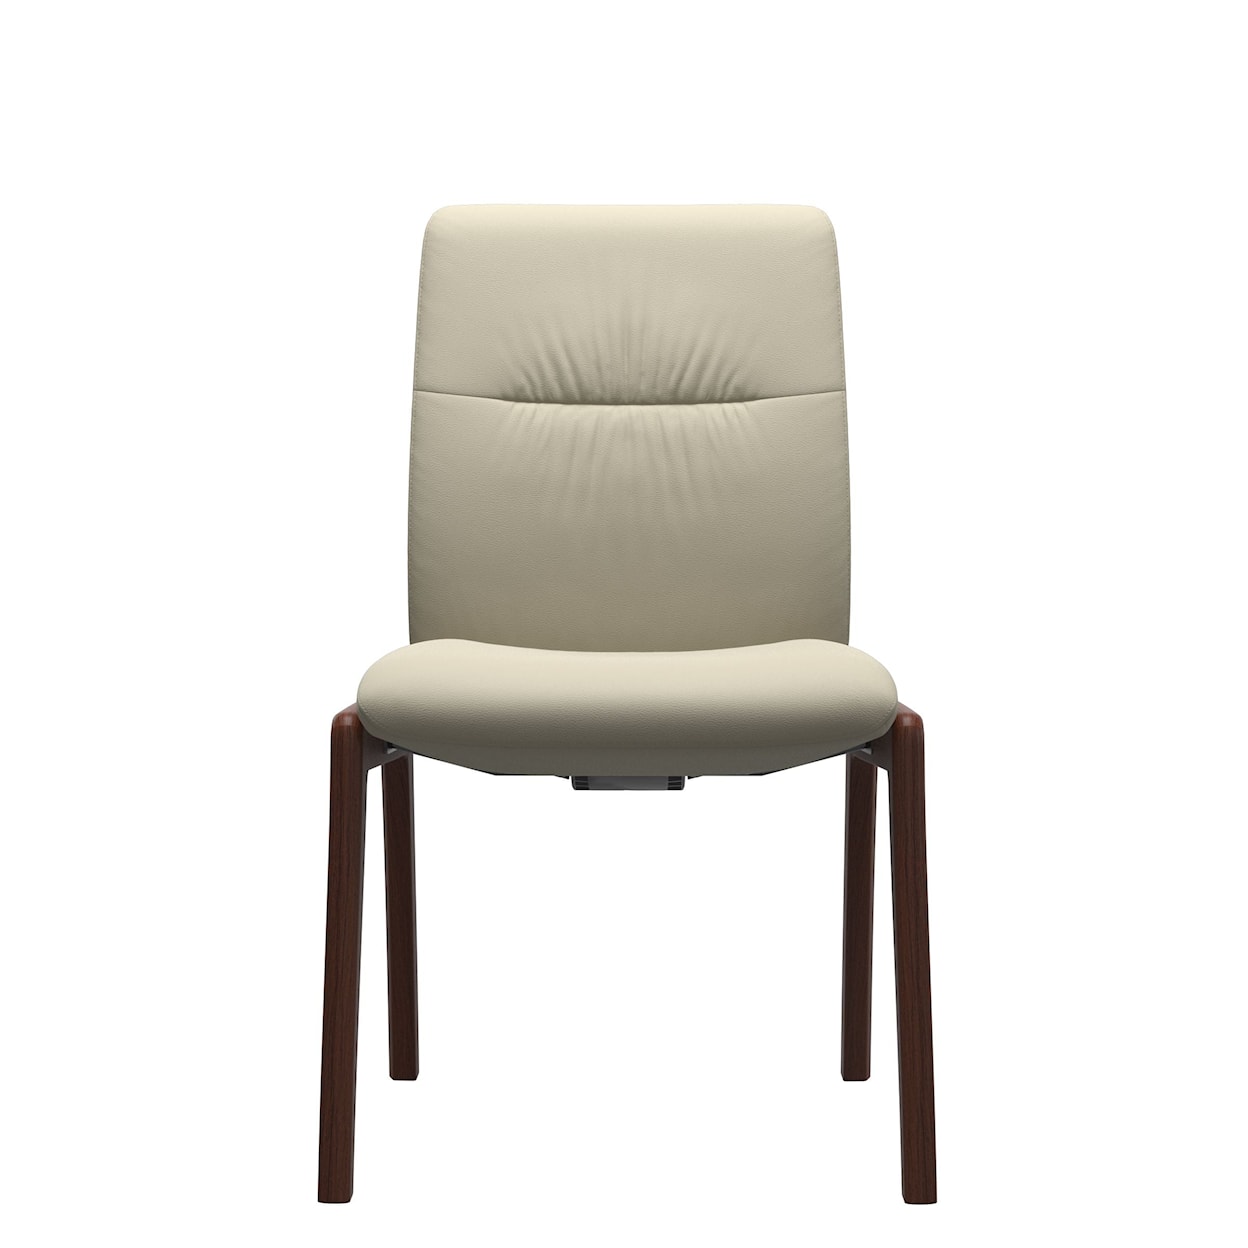 Stressless by Ekornes Stressless Mint Mint Large Low-Back Dining Chair D100